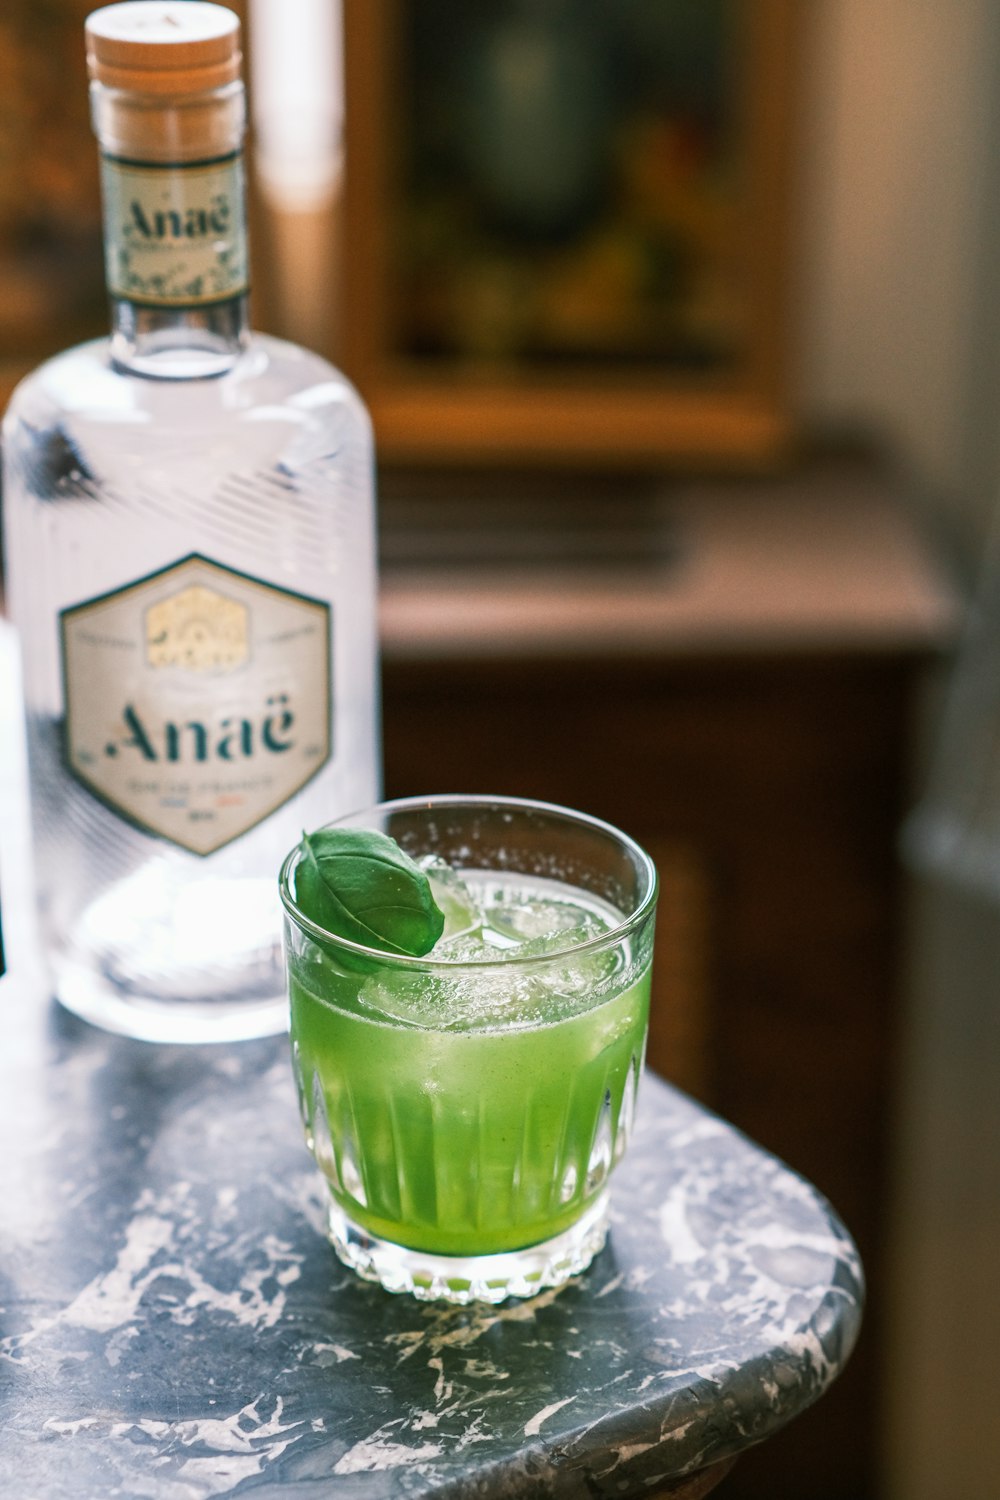 a glass of green liquid next to a bottle of gin